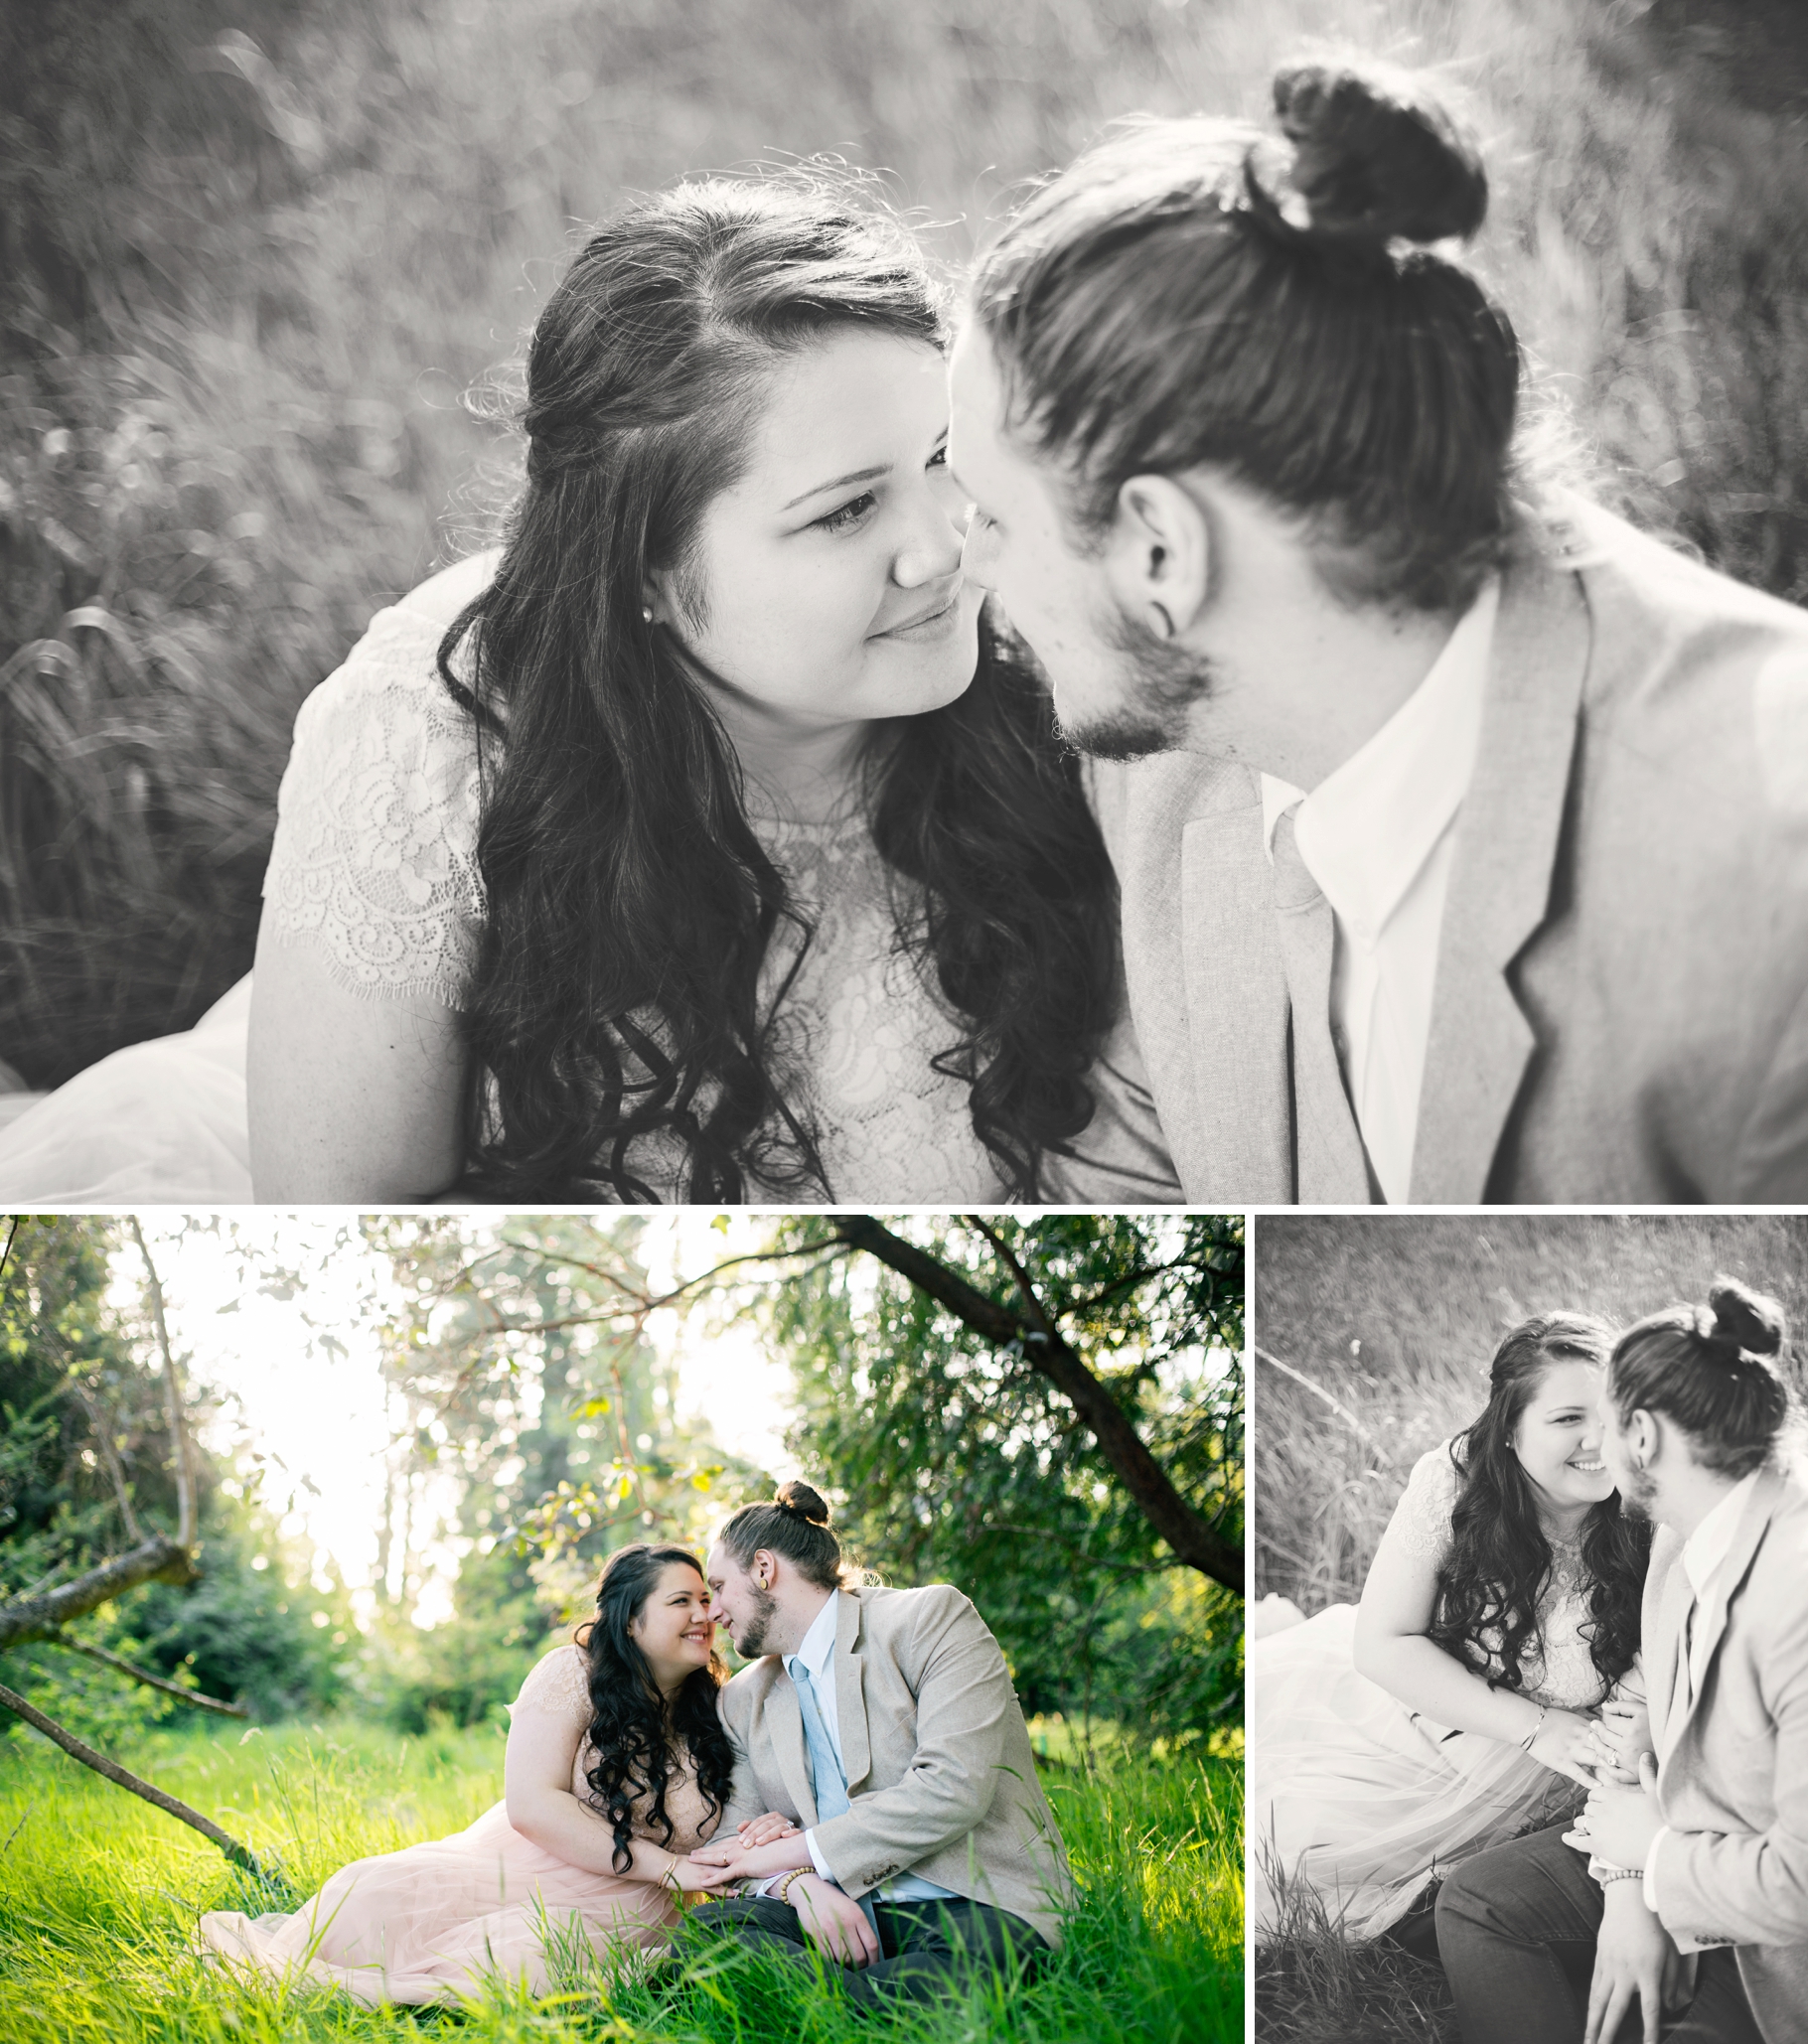 25-Bride-Groom-Portraits-Discovery-Park-Woodland-Elopement-Seattle-Photographer-Wedding-Photography-by-Betty-Elaine